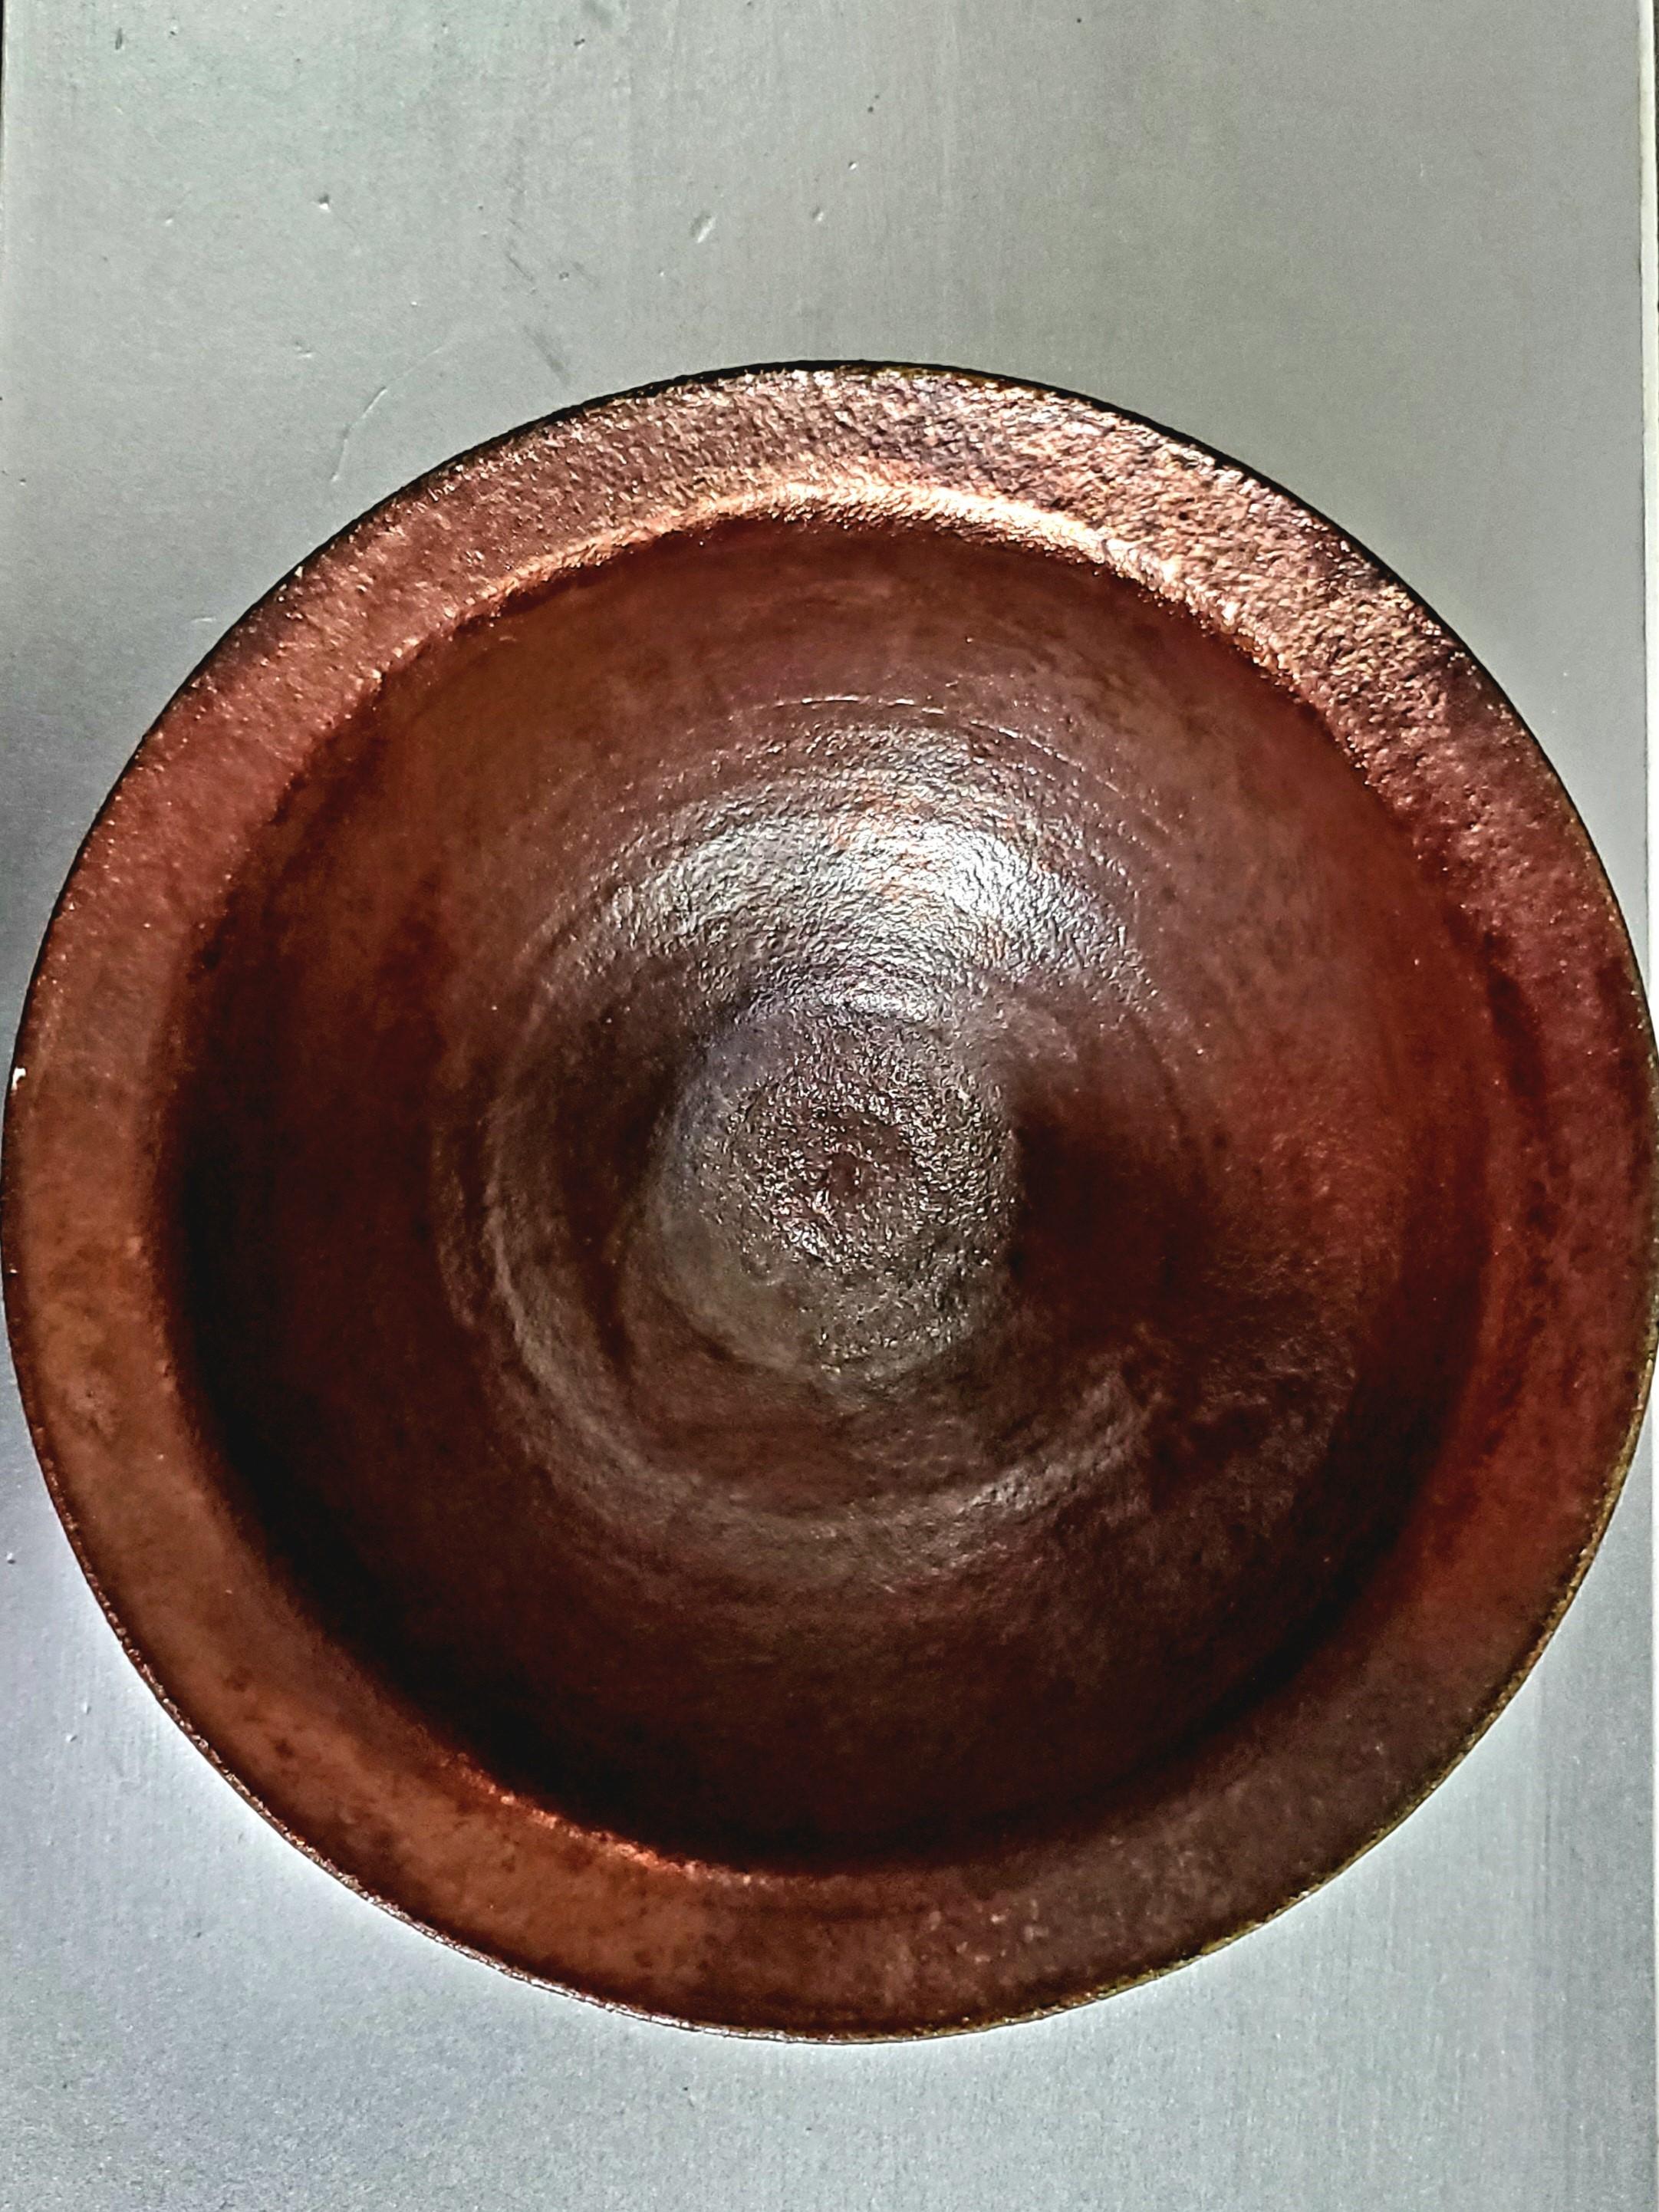 This stunning pottery bowl has an iridescent copper glaze with mimicked verdigris on a manganese–brown background. The glaze reflects the light, giving off a bright copper glow, and the iridescence and verdigris accents provide a delight to the